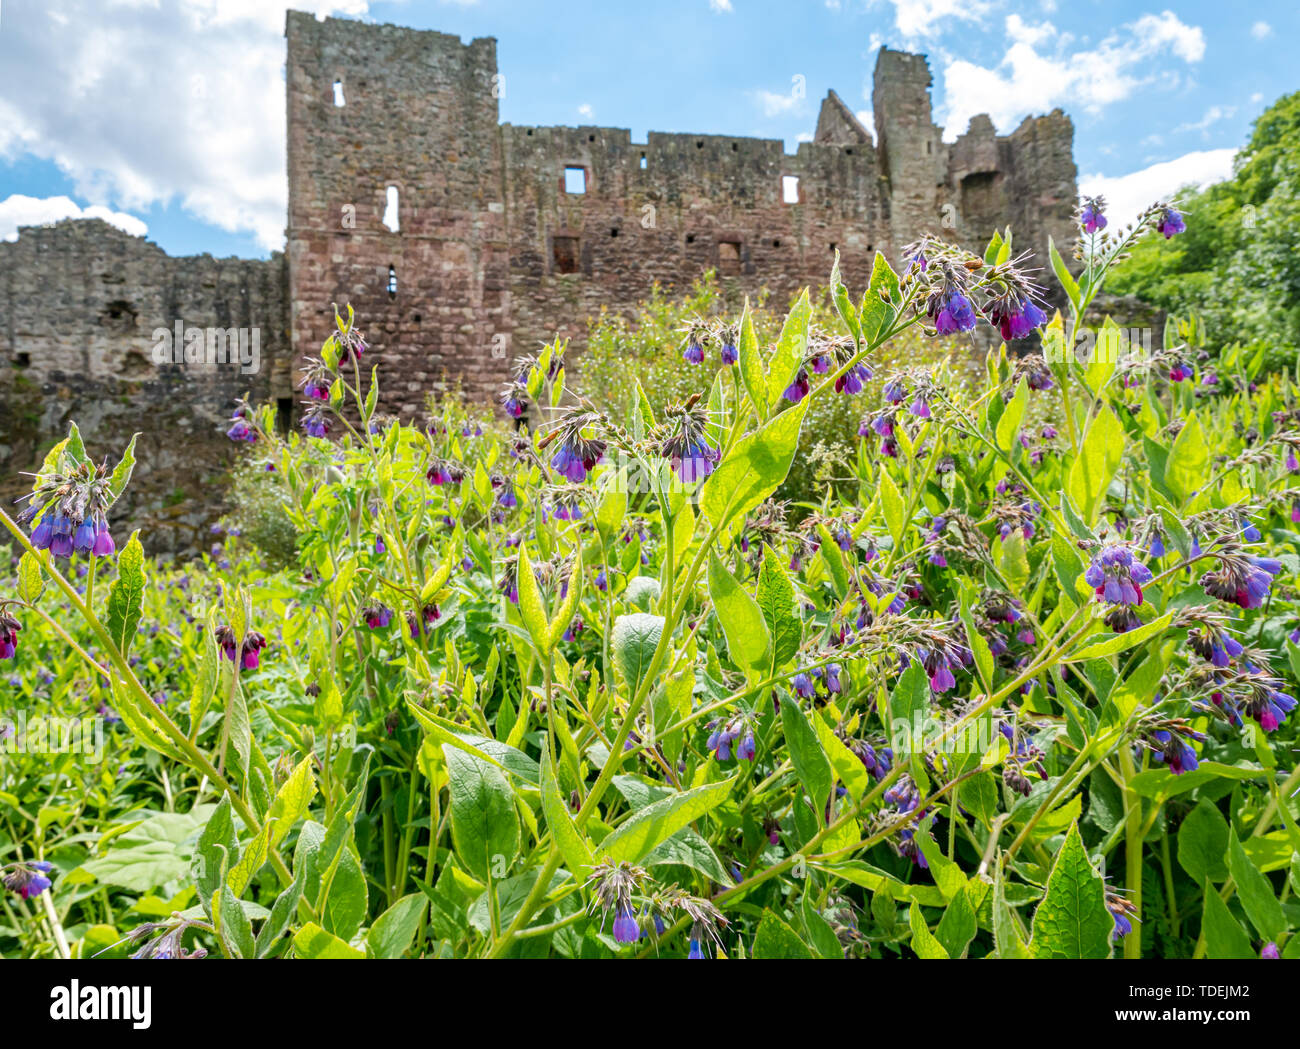 River Tyne path, East Lothian, Scotland, United Kingdom, 15th June 2019. UK Weather: The vegetation along the path is lush and high with Russian comfrey, Symphytum x uplandicum purple wild flowers on the riverbank of River Tyne at ruined 14th century Hailes Castle Stock Photo